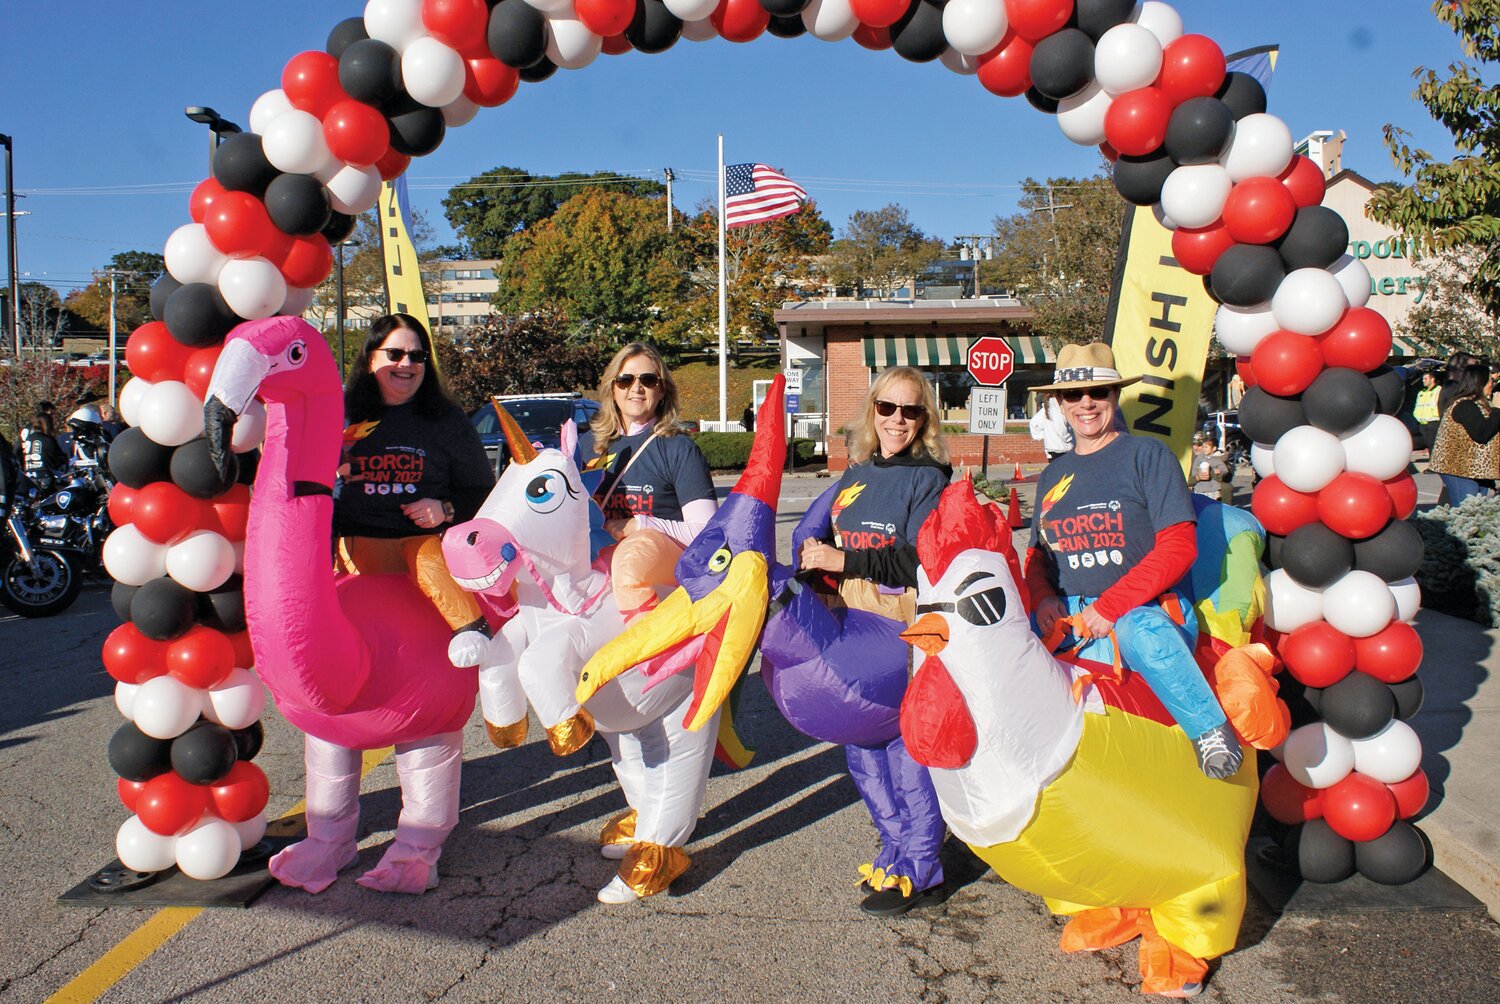 DRESSED TO MOVE: Flamingo Amy Ursillo and her friends Unicorn Karol Beattie, Pterodactyl Edye McCarthy and Rooster Rhonda Ziehl joined in the fun as members of the Walk. (Photos by Steve Popiel)